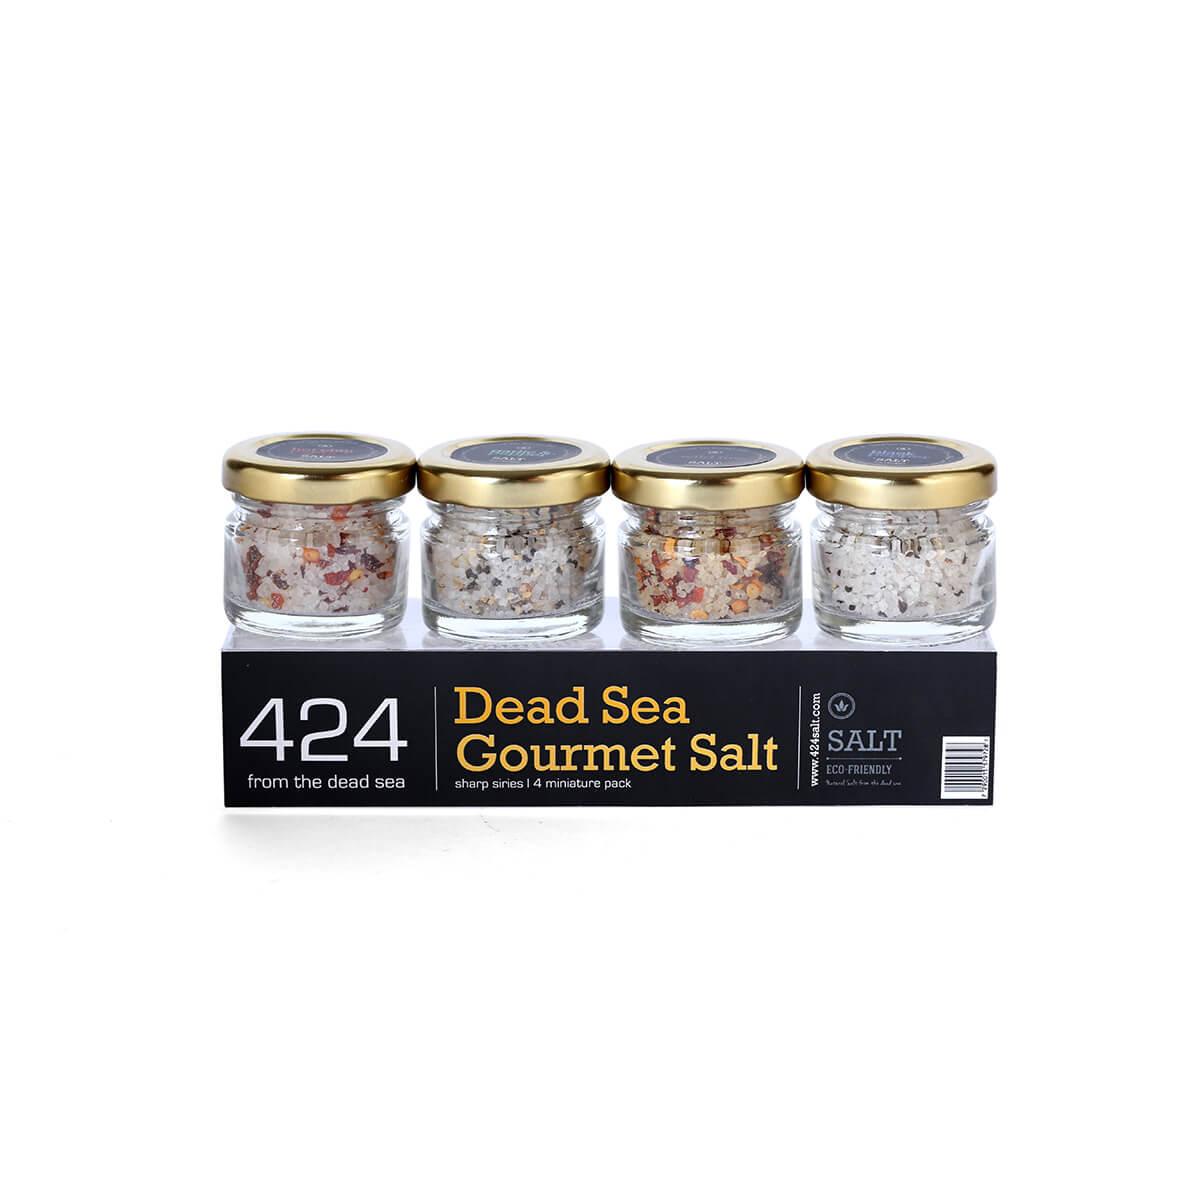 4 mix mini jars Of Gourmet Salt From The Dead Sea - Spring Nahal